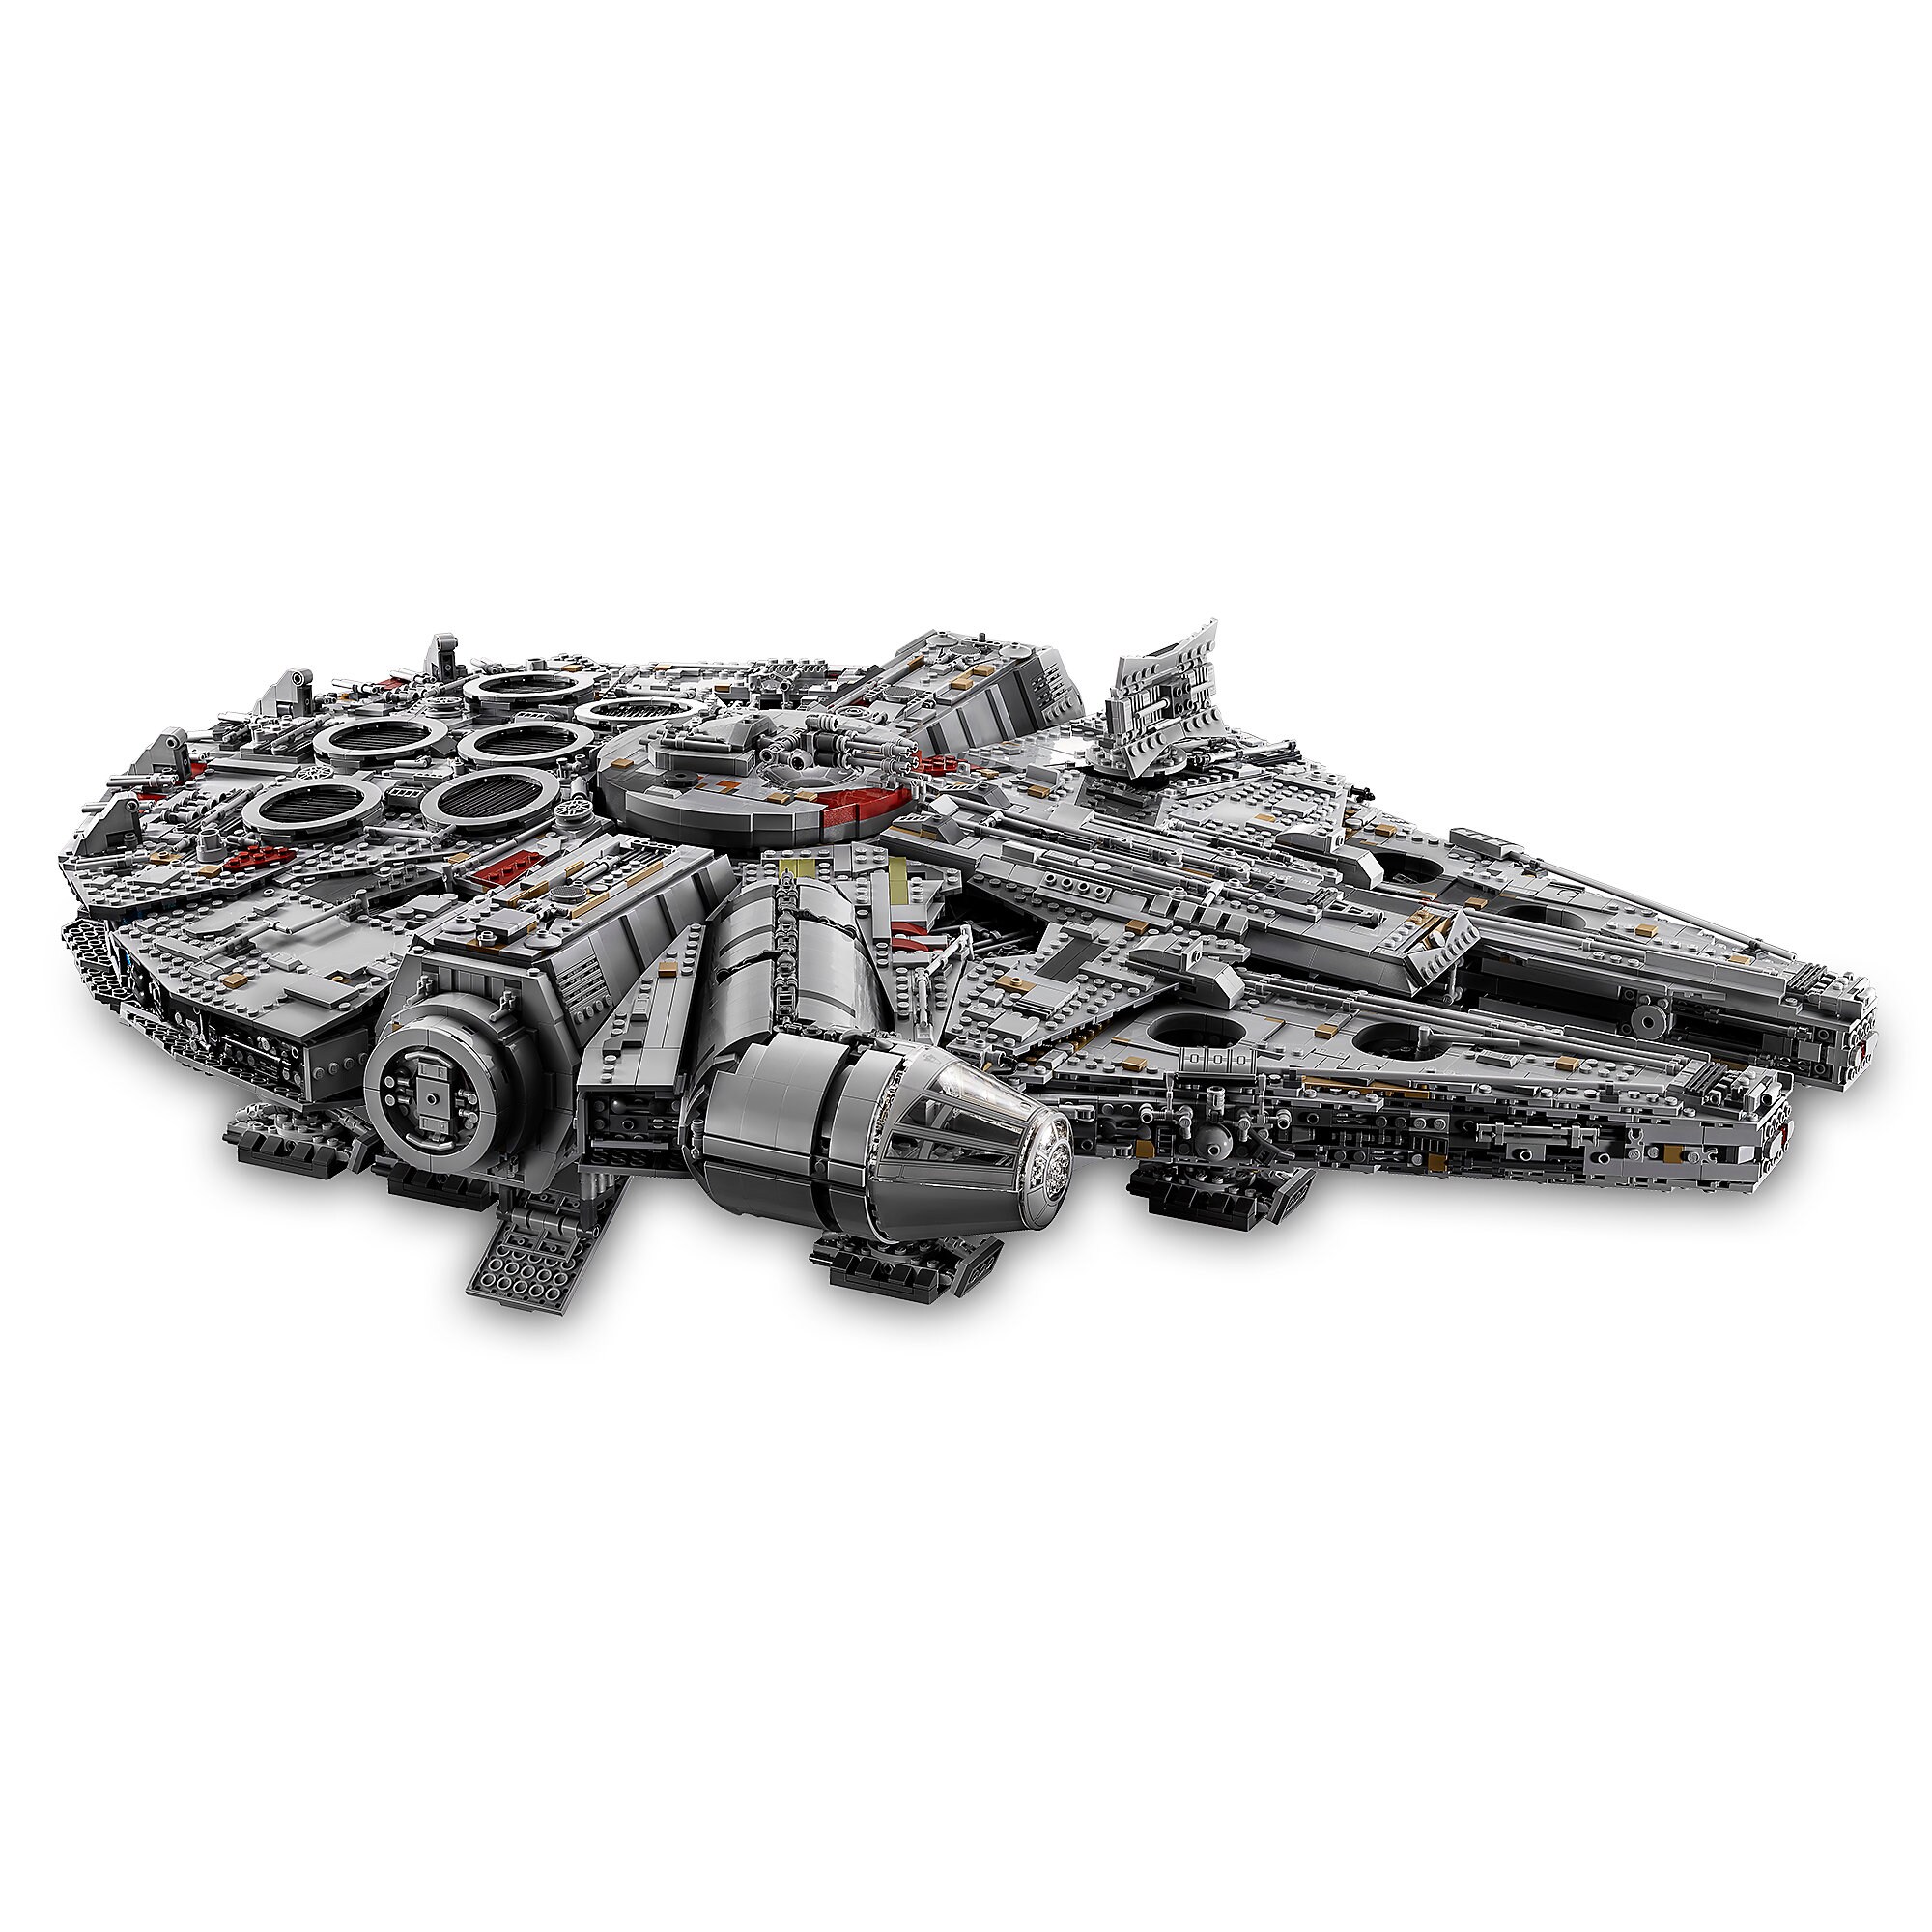 Millennium Falcon Ultimate Collector Playset by LEGO - Star Wars